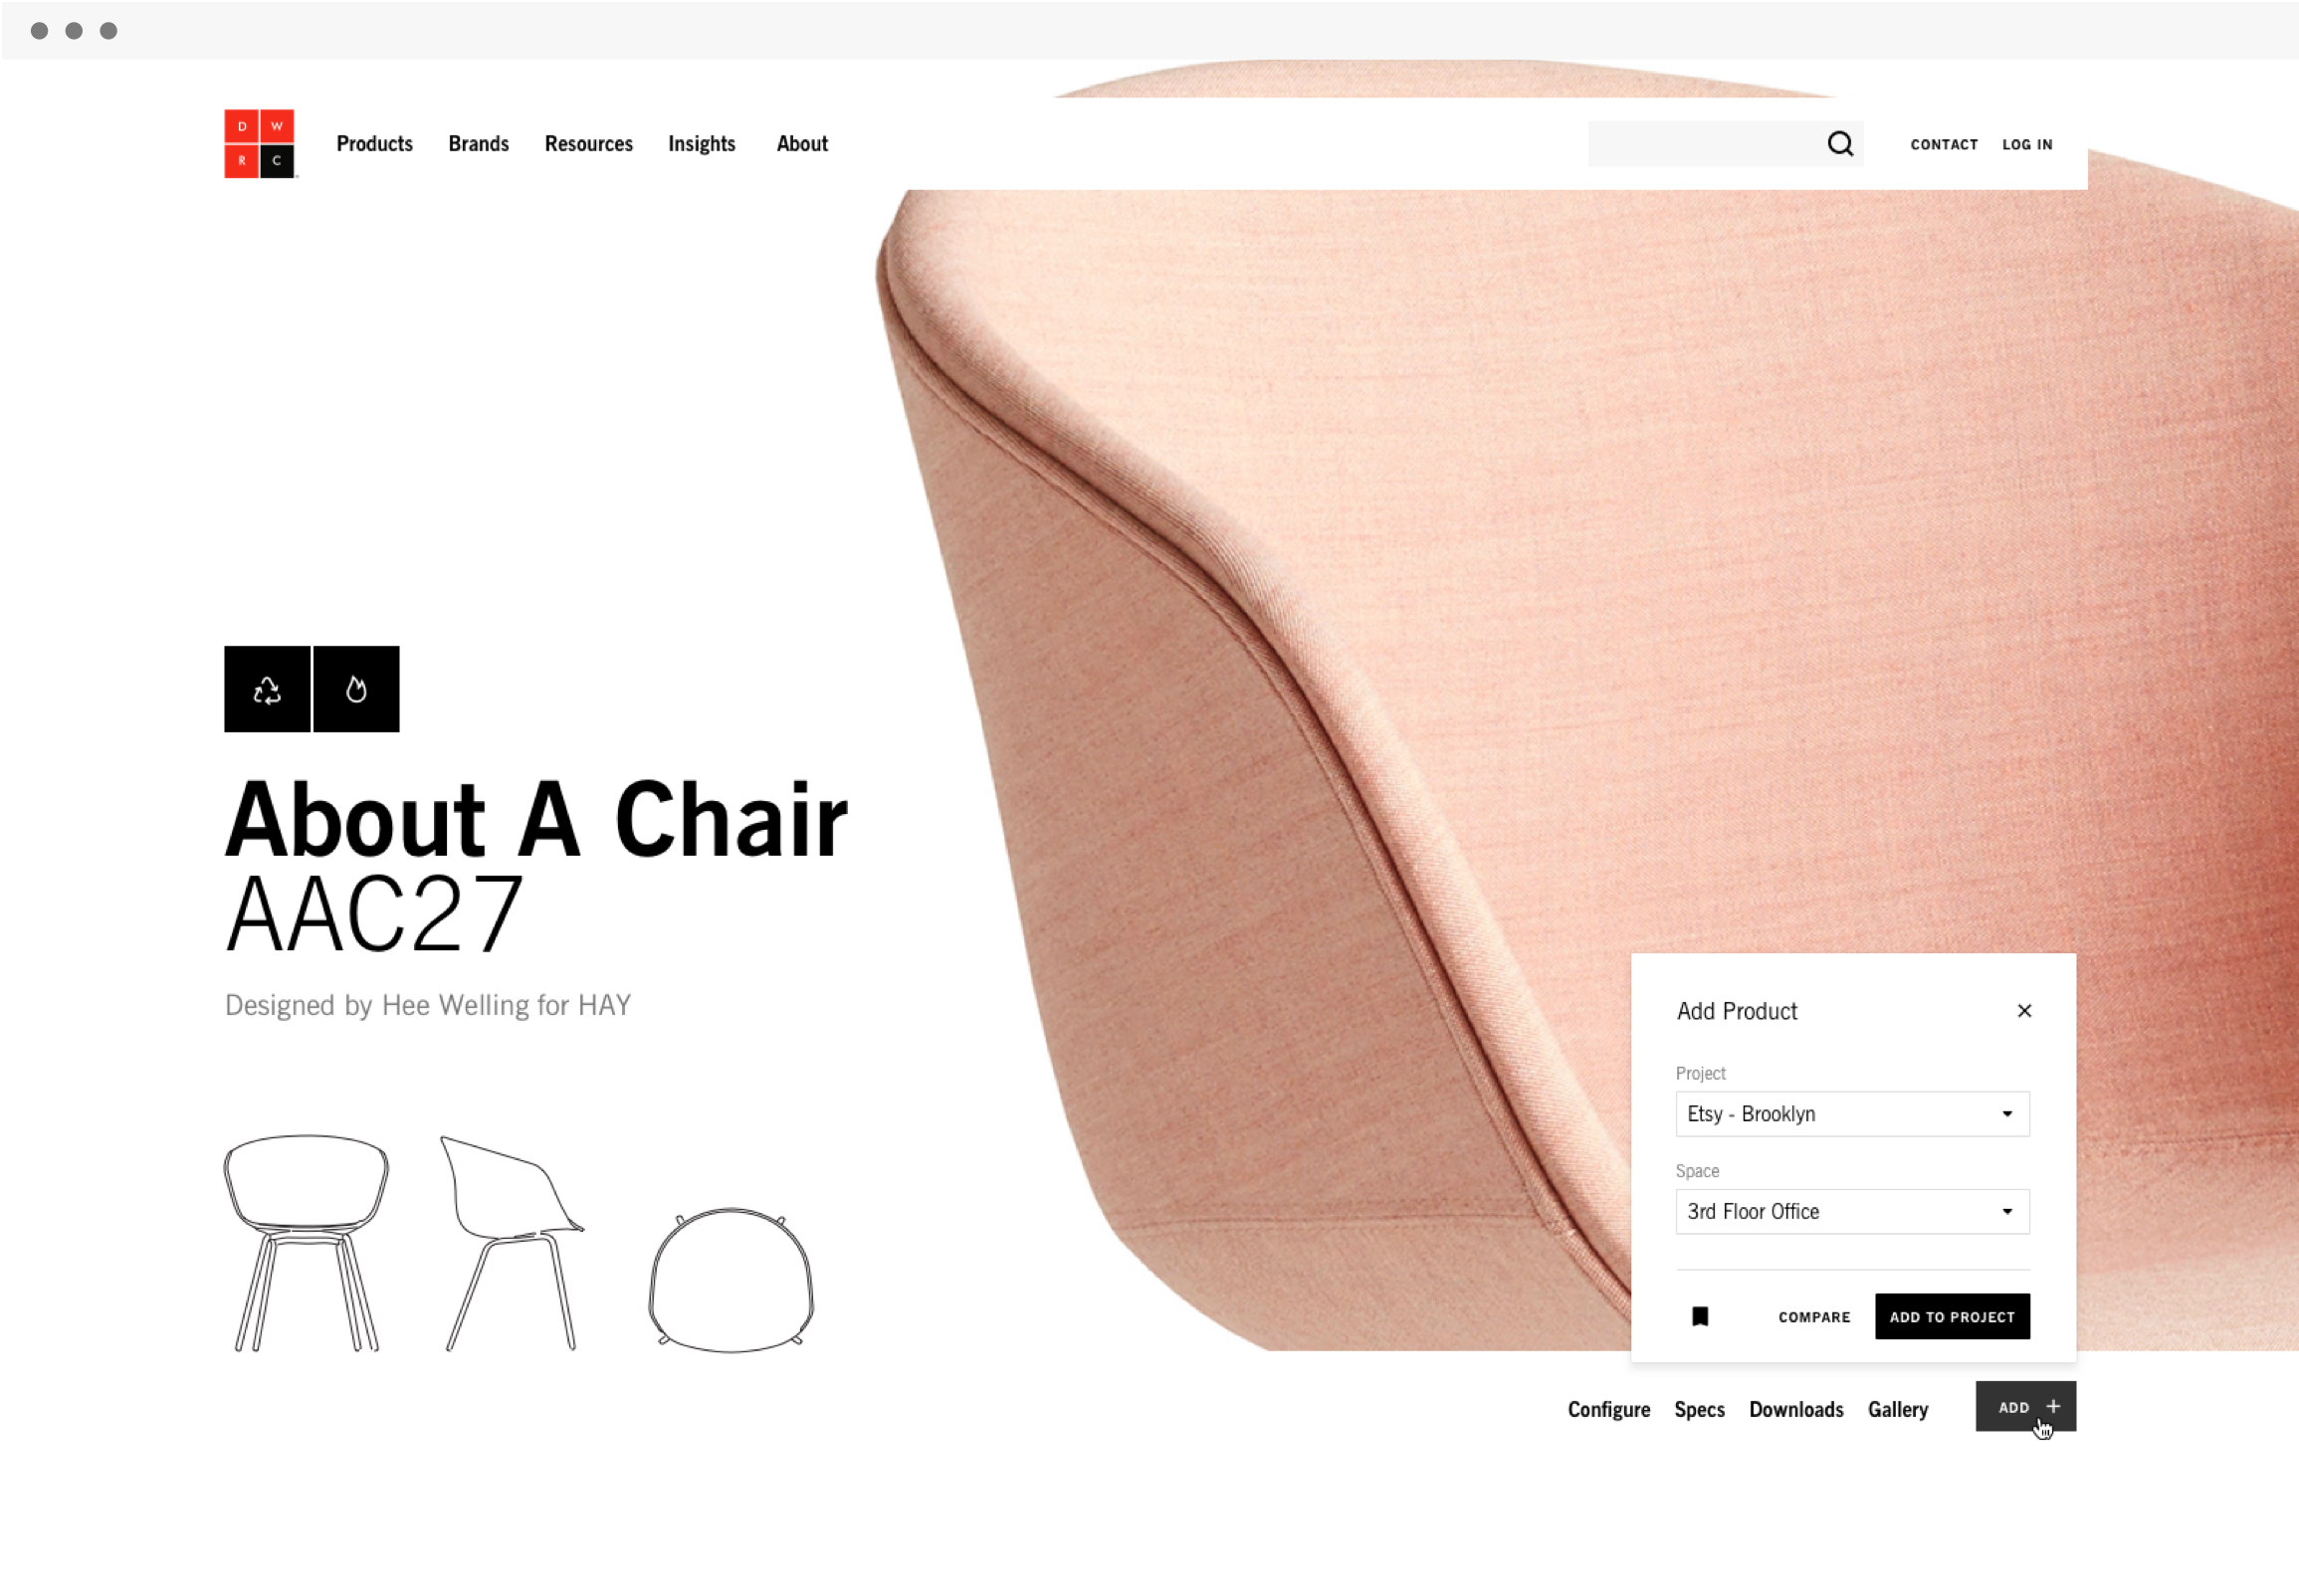 DWRC product detail webpage featuring AAC27 chair